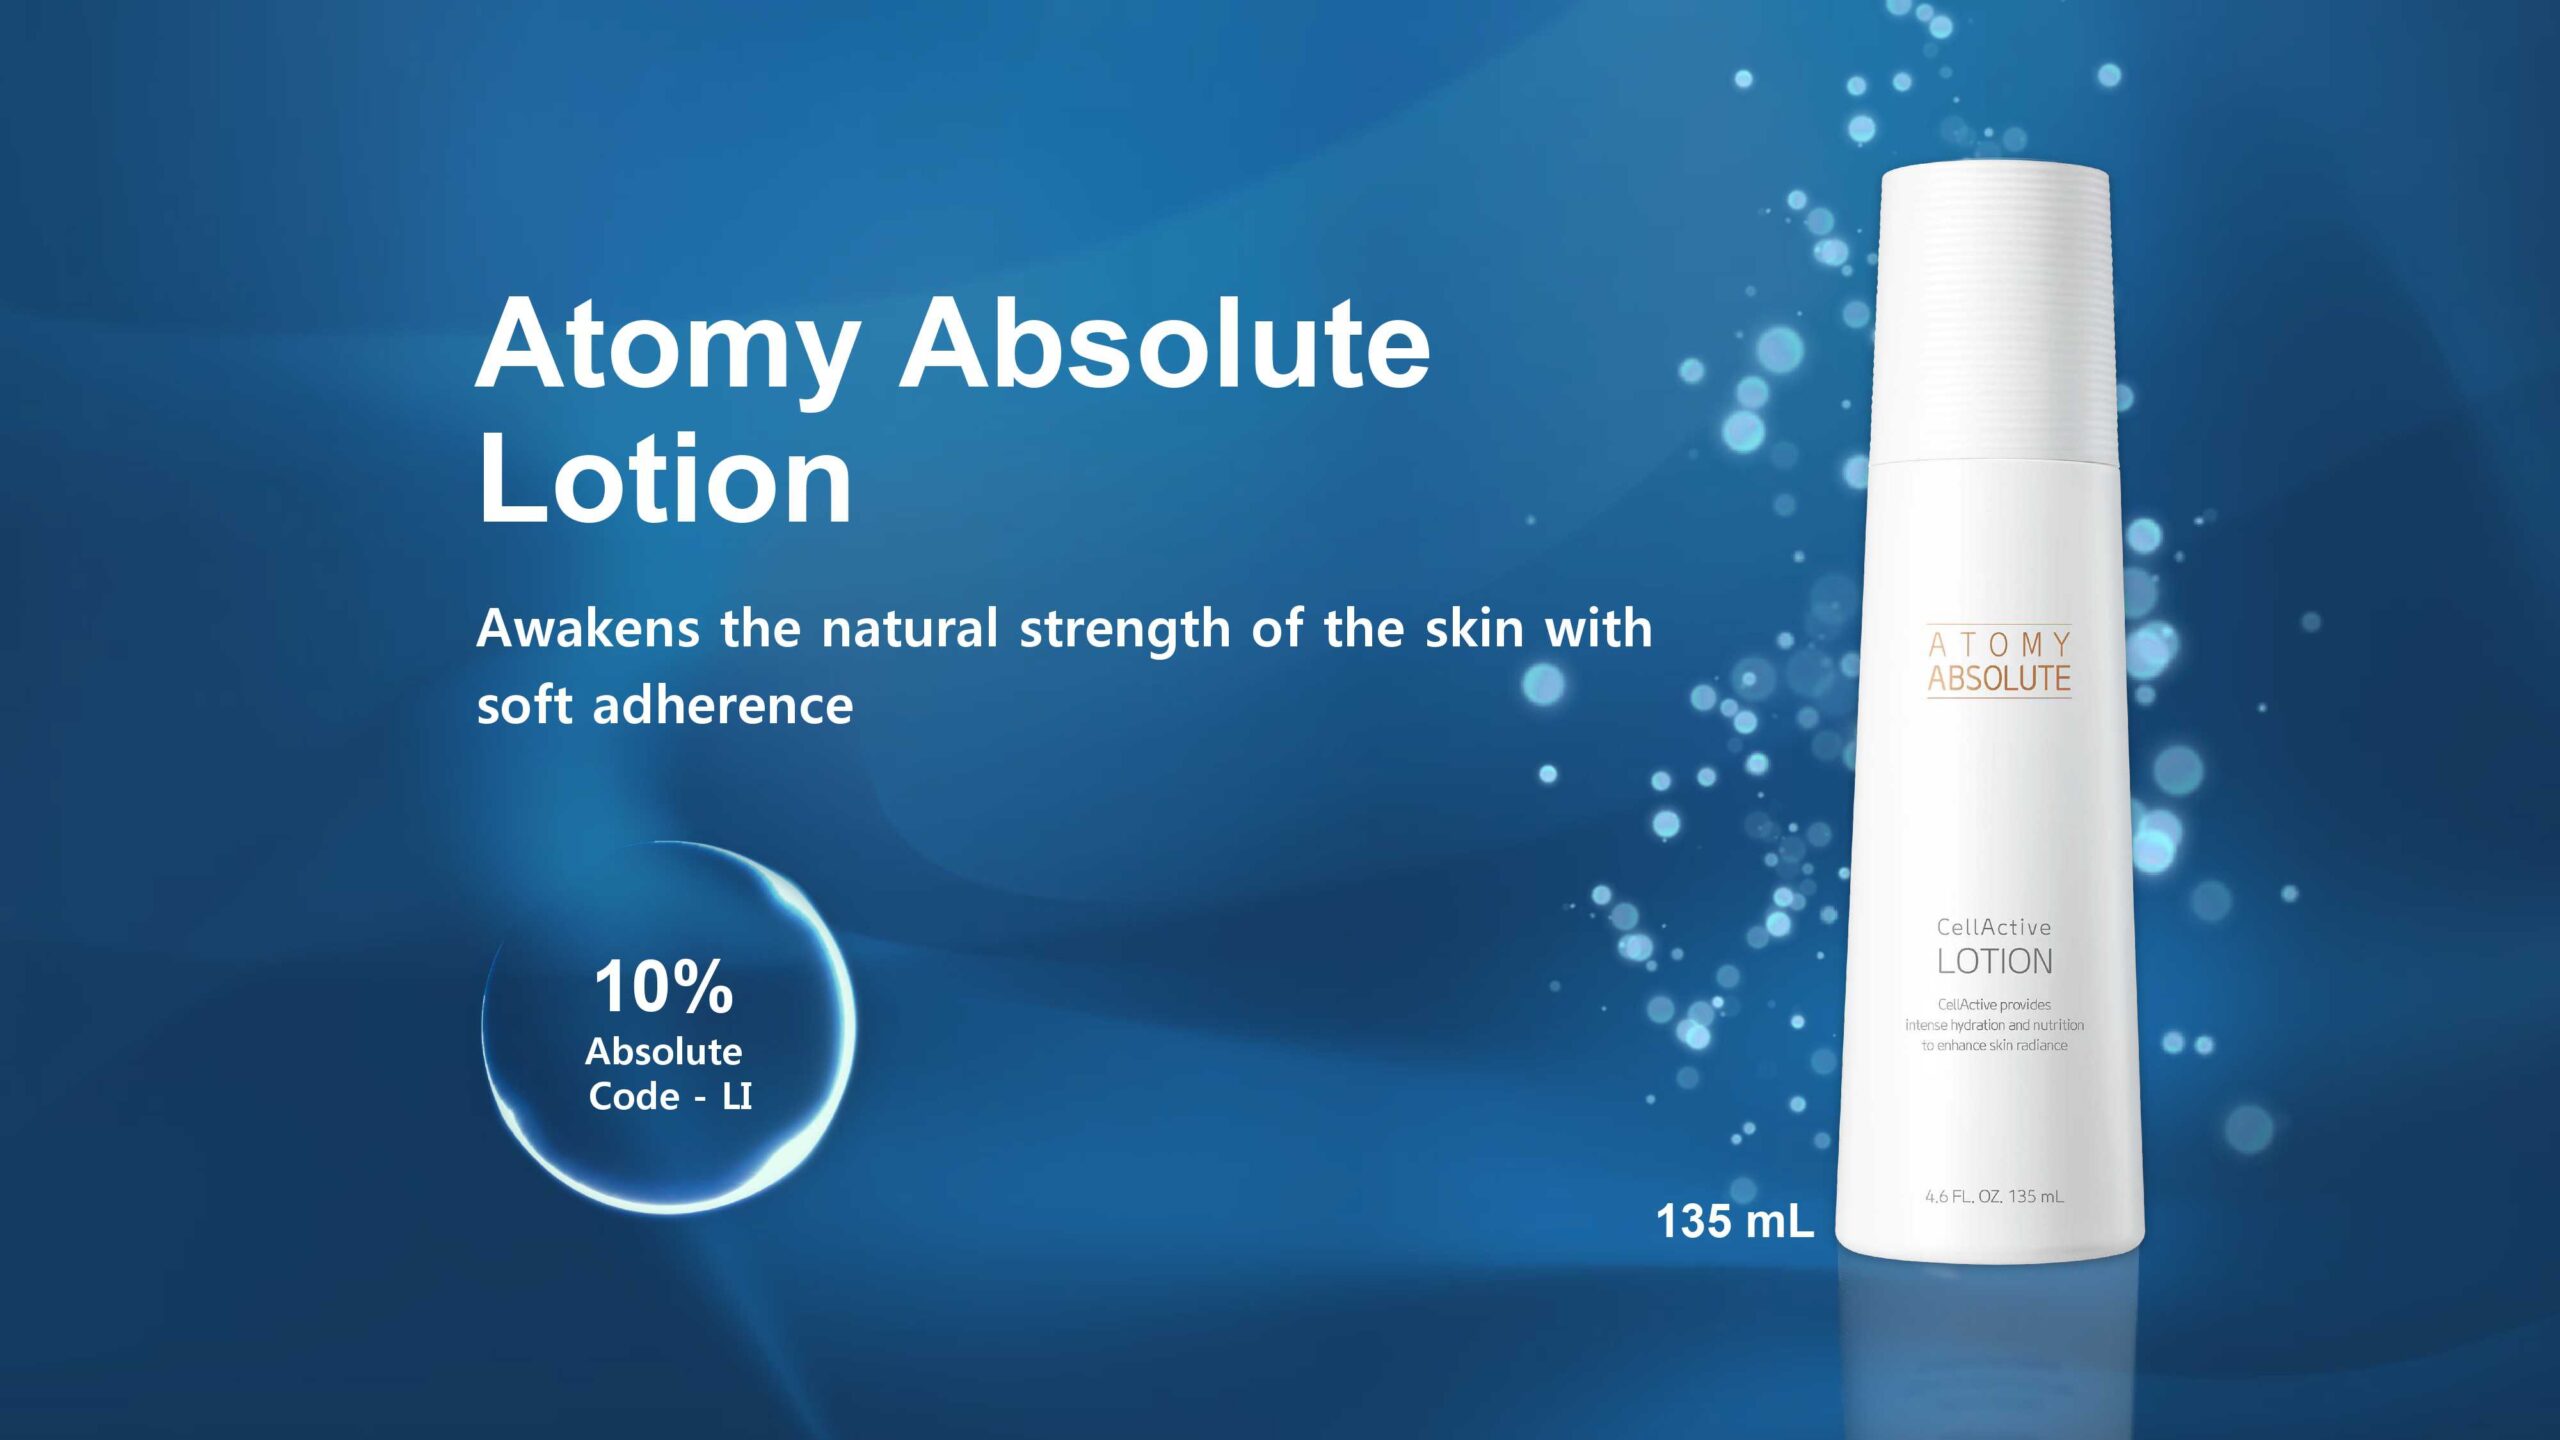 ATOMY Absolute Cell Active Lotion